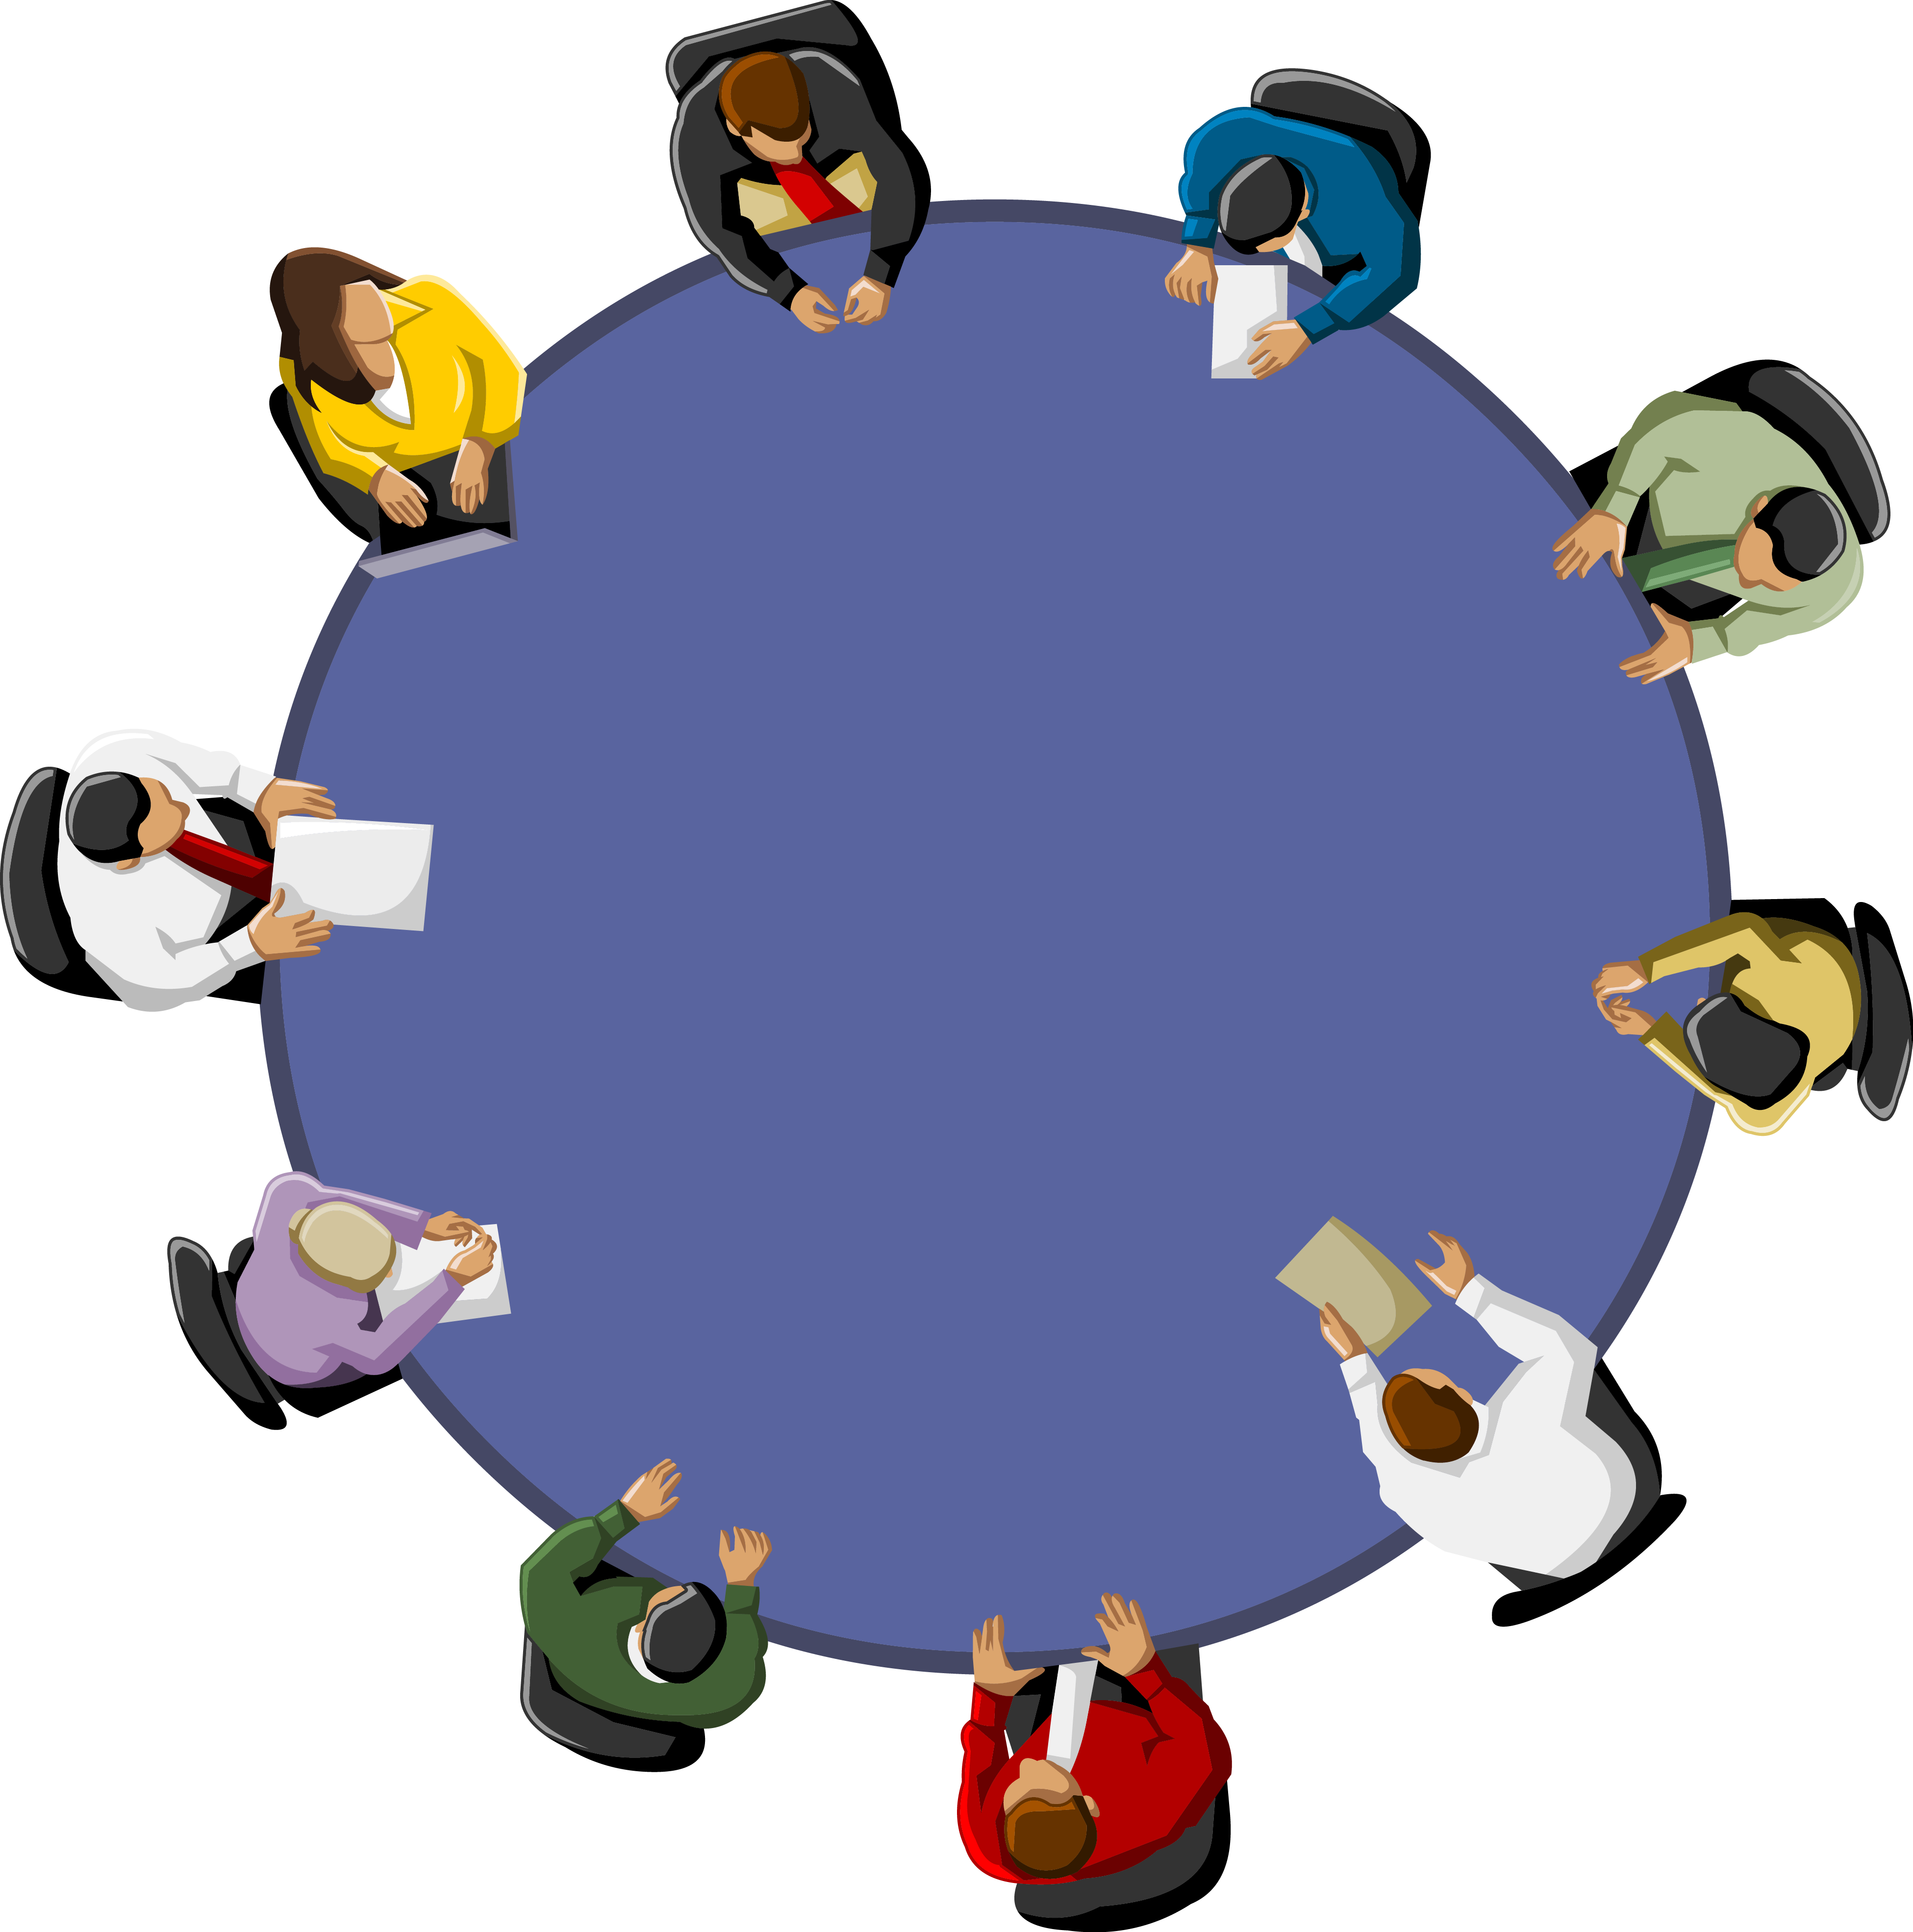 zoom meeting clipart free